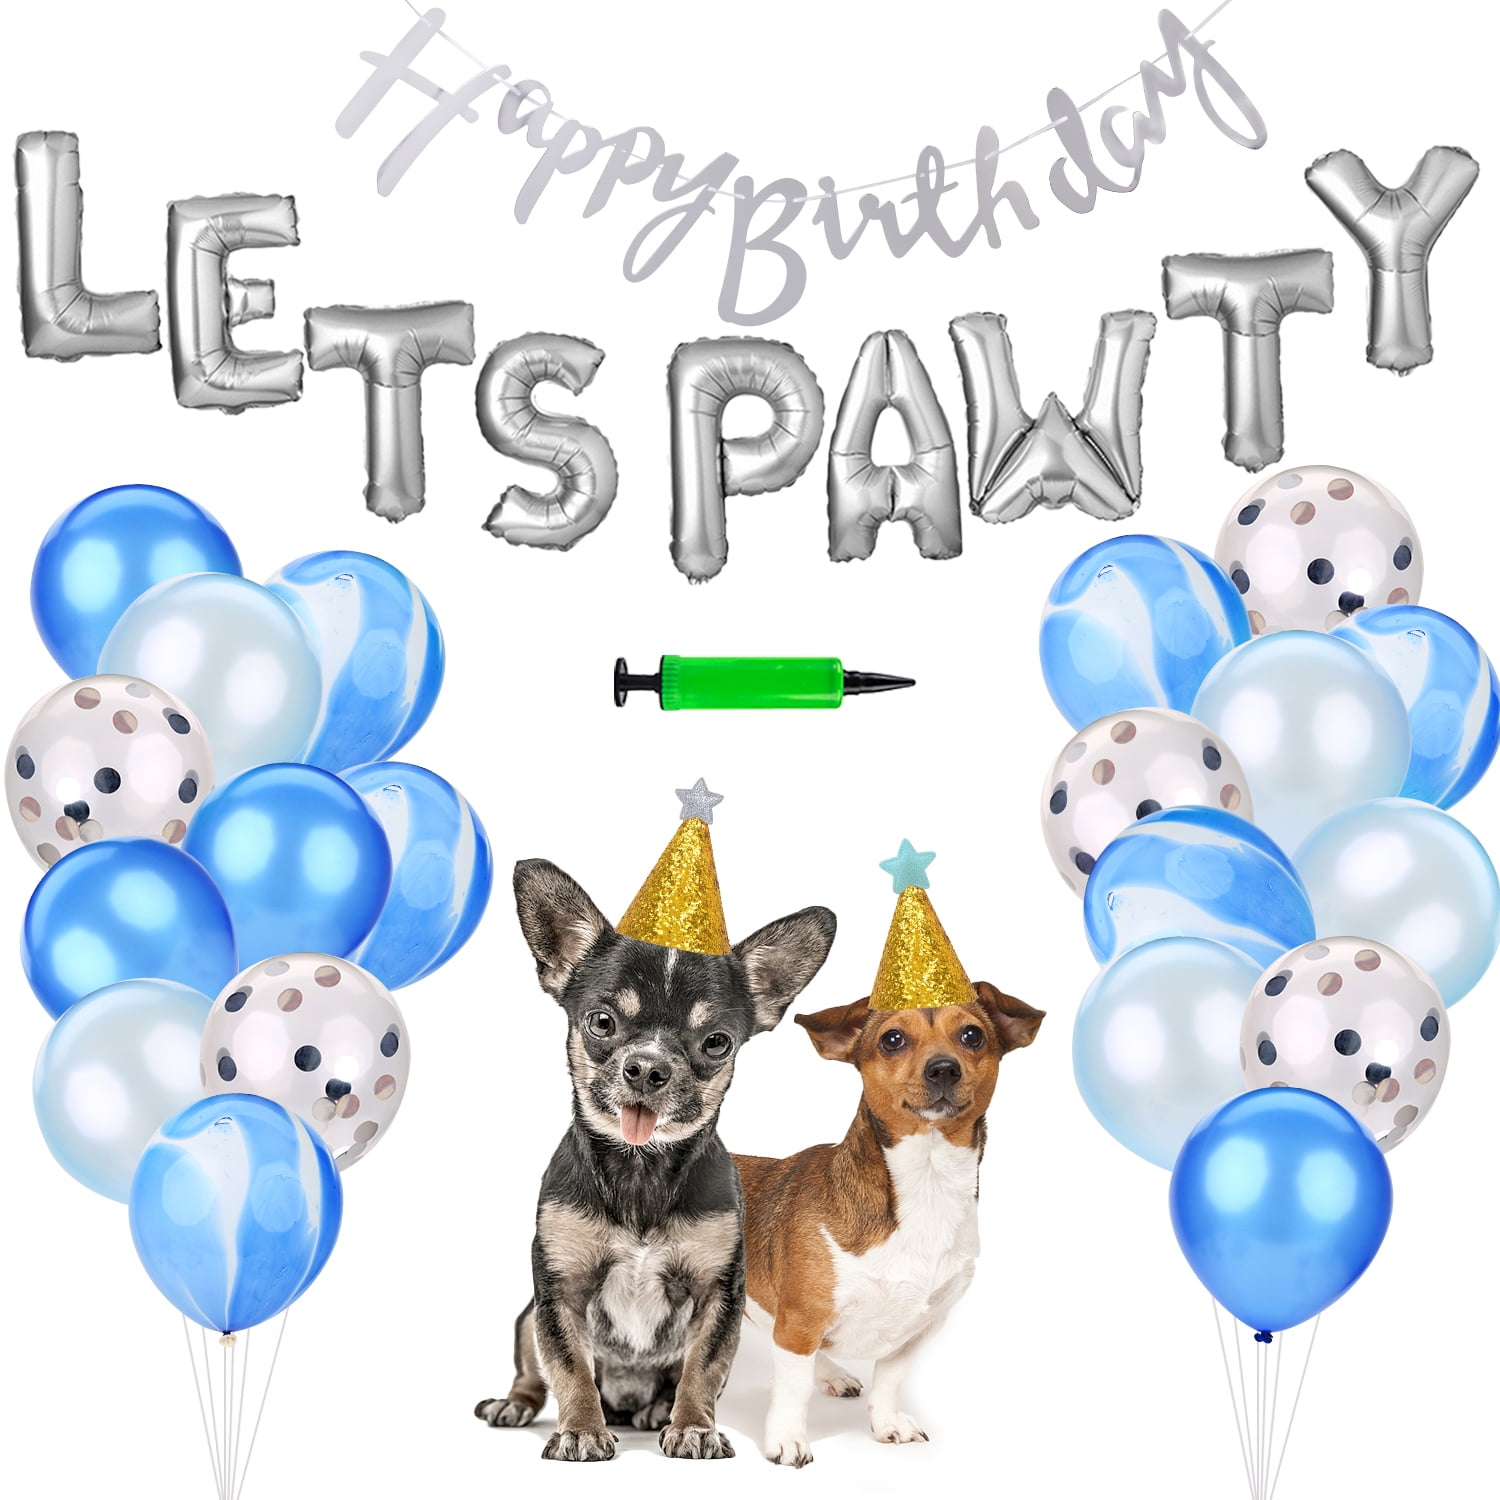 Puppy Dog Pals Birthday Party Decorations Dog Birthday Balloons Set Including Wood Letters Balloons and Dog Birthday Foil Banner Legendog Dog Birthday Party Supplies/Decorations 